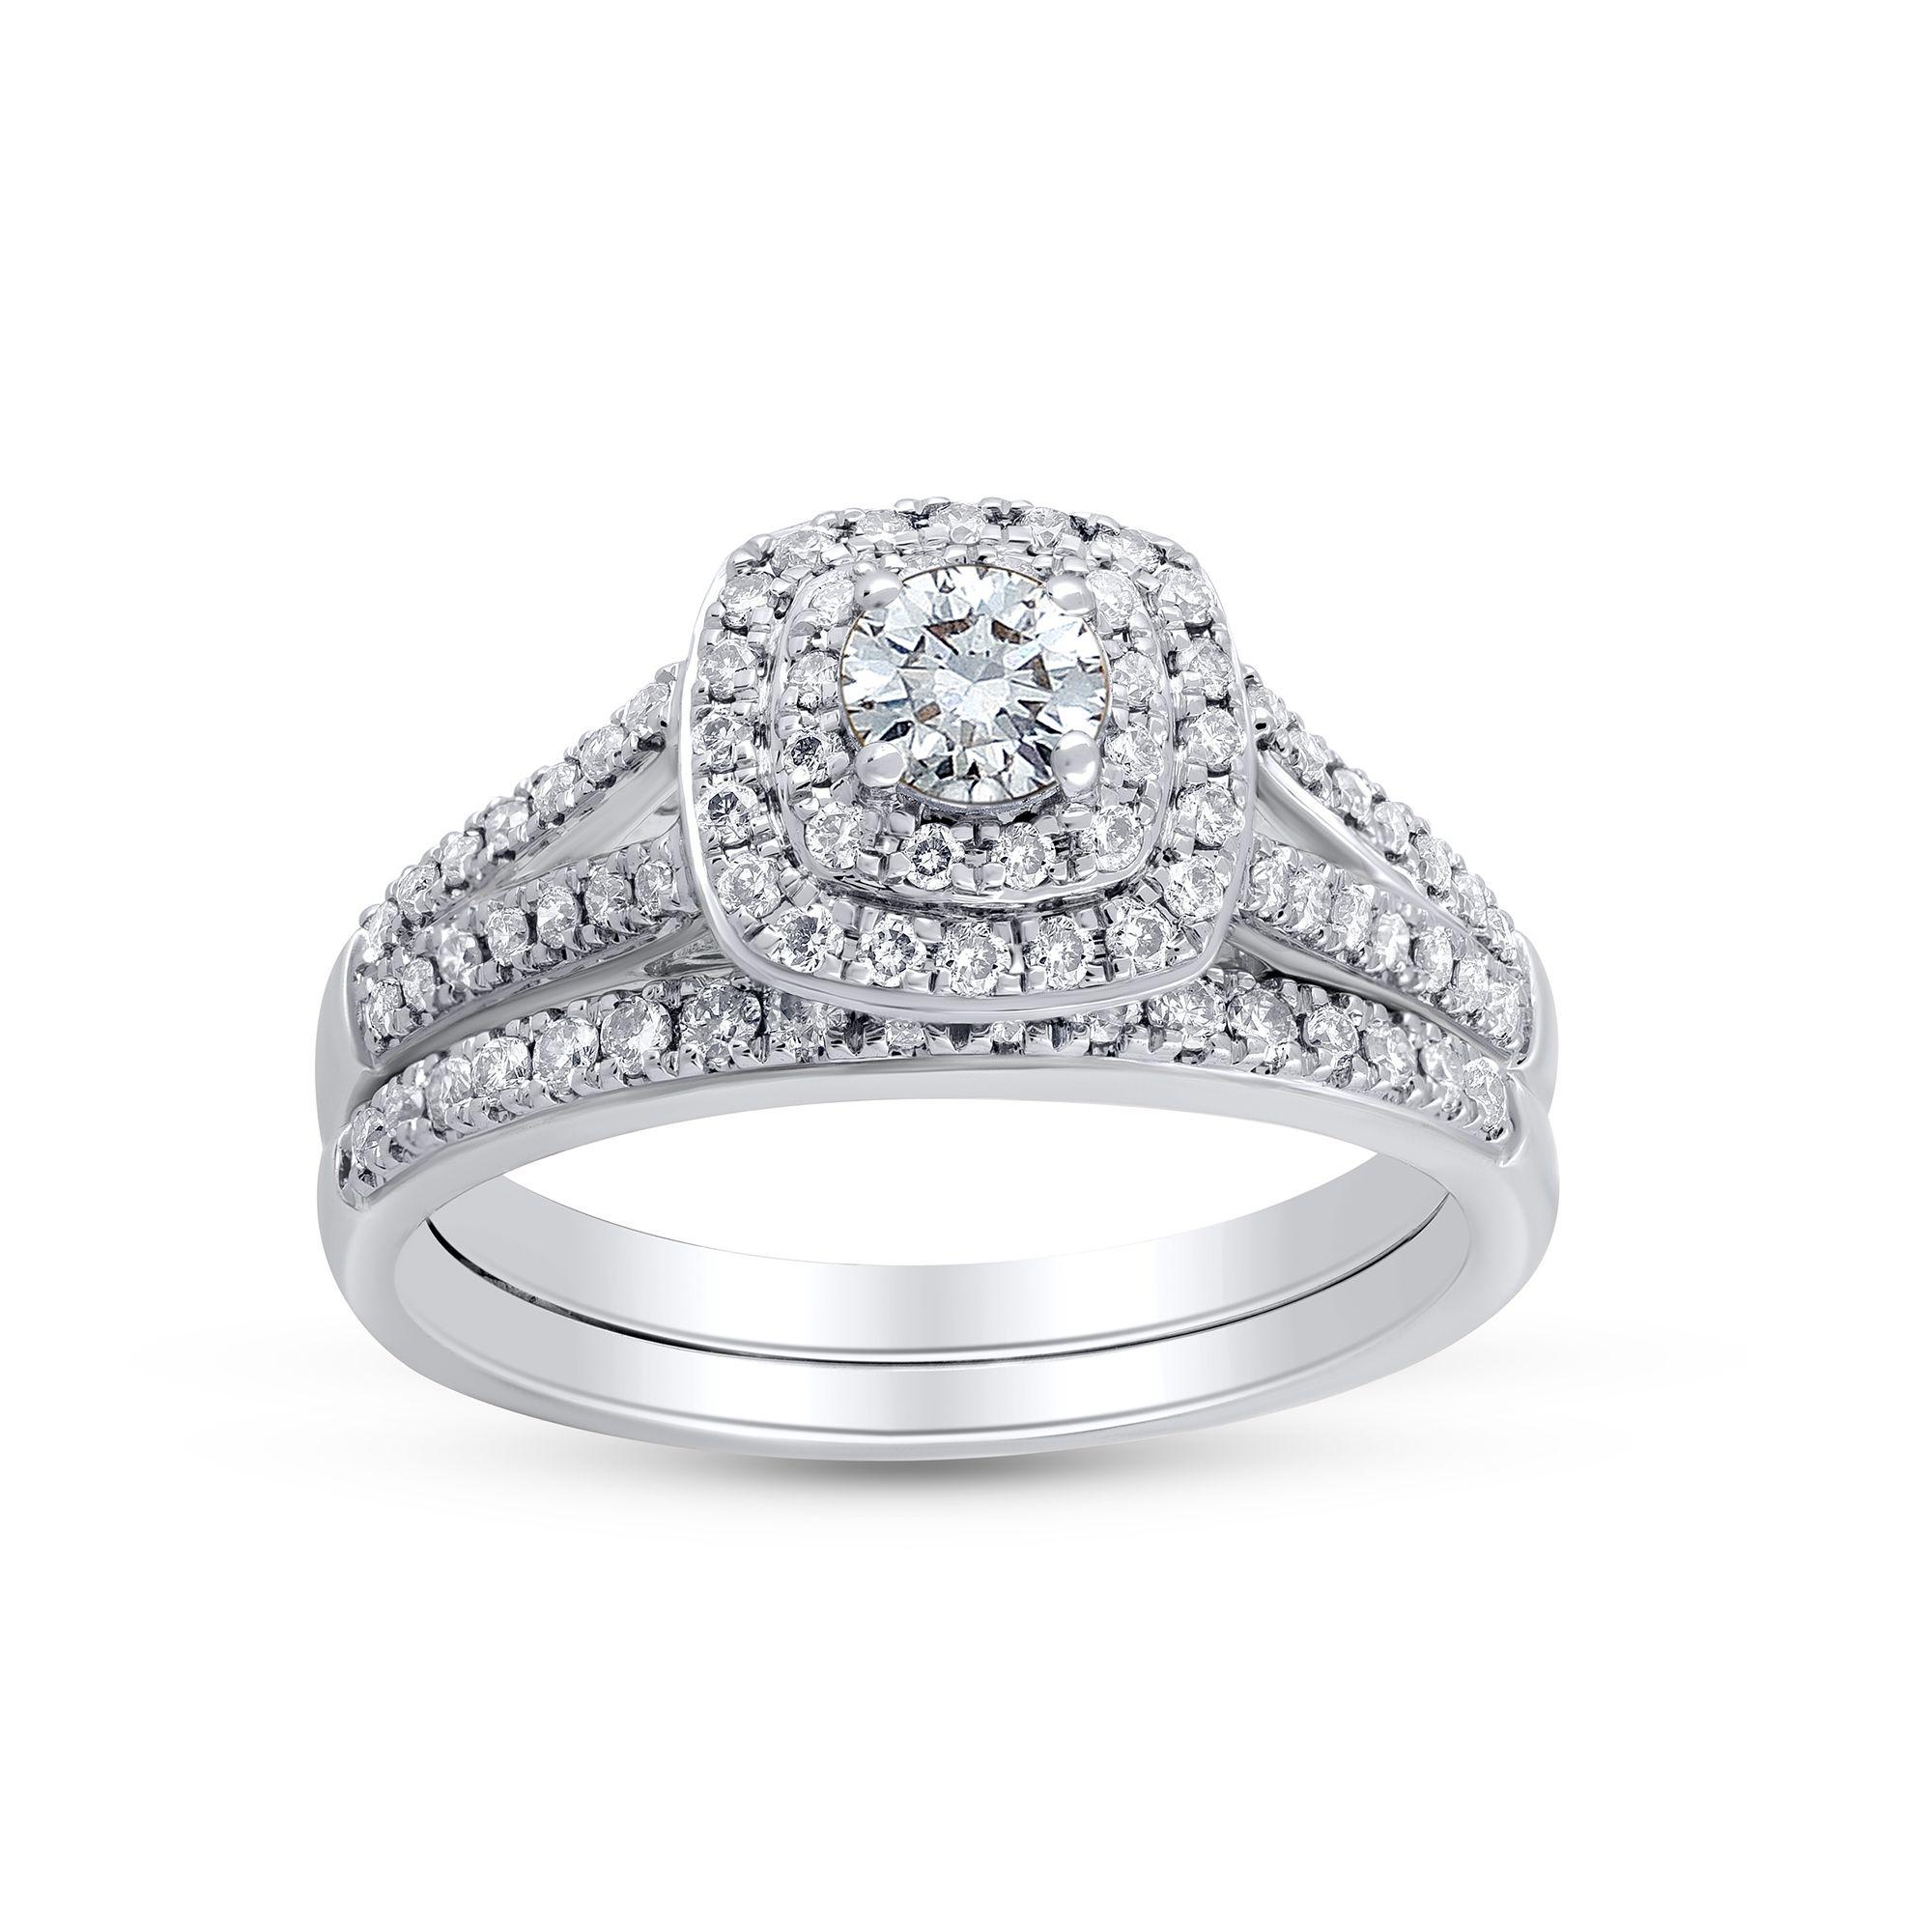 A delightful engagement ring studded with 78 diamonds in pong and micro prong setting. The ring is crafted in 14 Karat white gold, diamonds are graded K-L Color, I1-I2 Clarity. 

Metal color and ring size can be customized on request. 